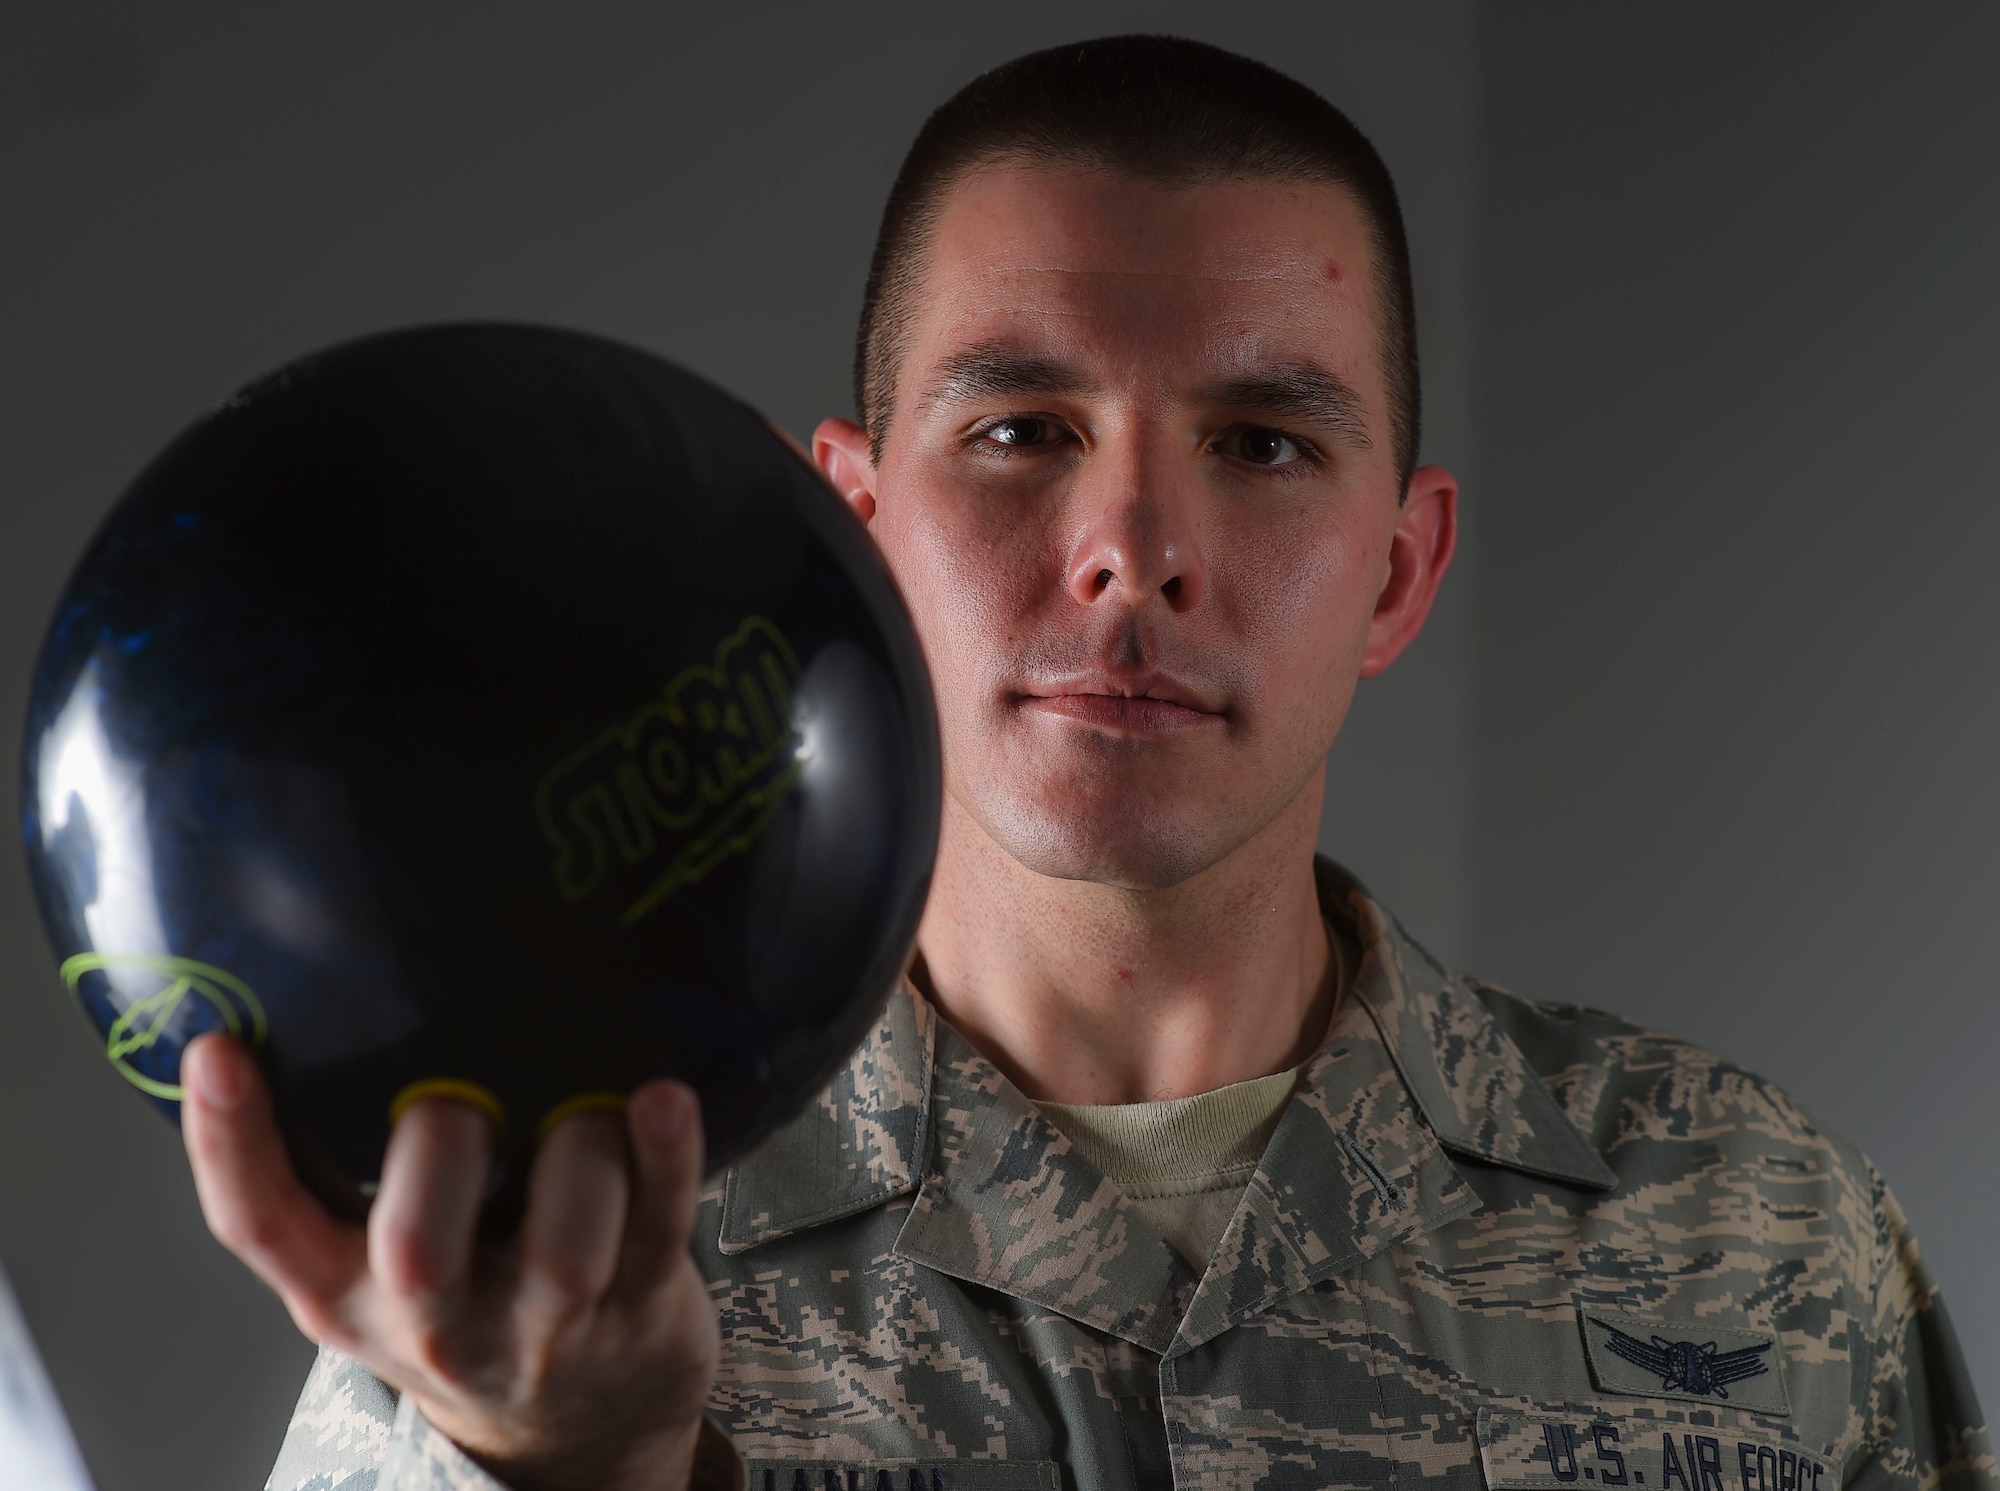 Staff Sgt. William Buchanan, 2nd Space Warning Squadron space operator, competed in the Military Bowling Championship Jan. 16-25, 2015, in Las Vegas, Nevada. Buchanan and his bowling team took 15th place out of 262 other teams during the championship. (U.S. Air Force photo by Airman 1st Class Samantha Saulsbury/Released)